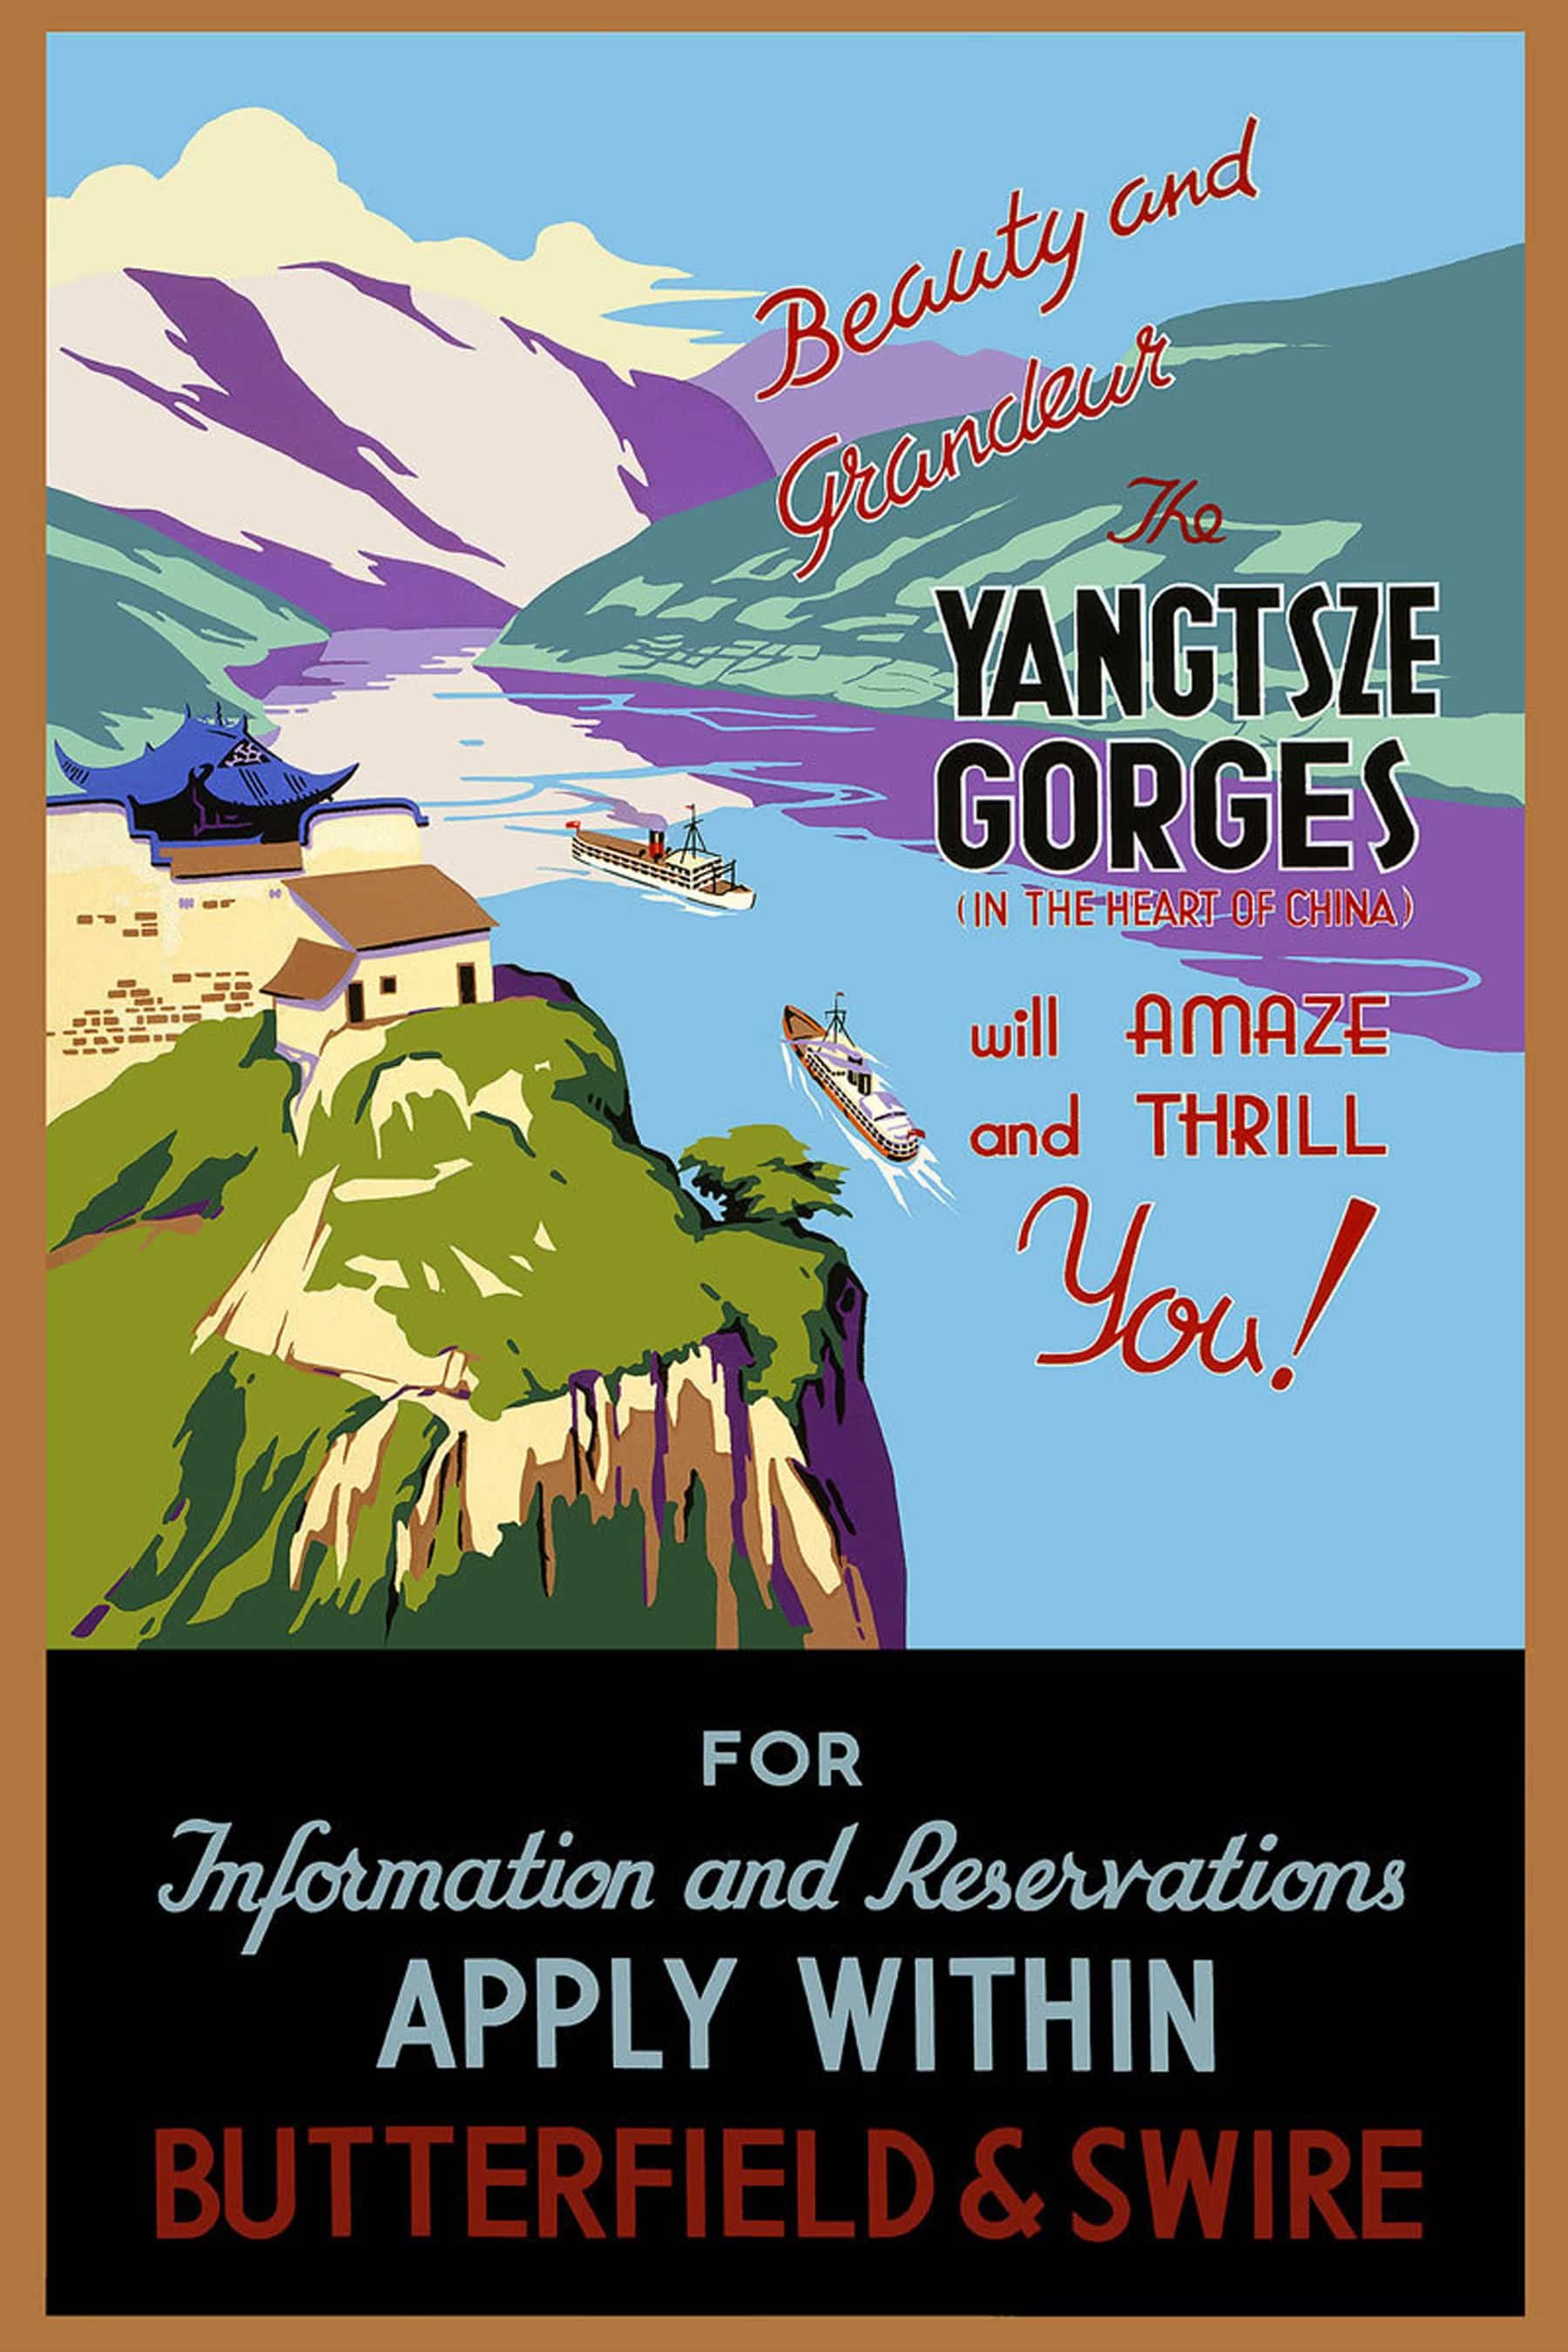 Beauty And Grandeur The Yangtsze Gorges Poster 1930 Vintage Travel Poster